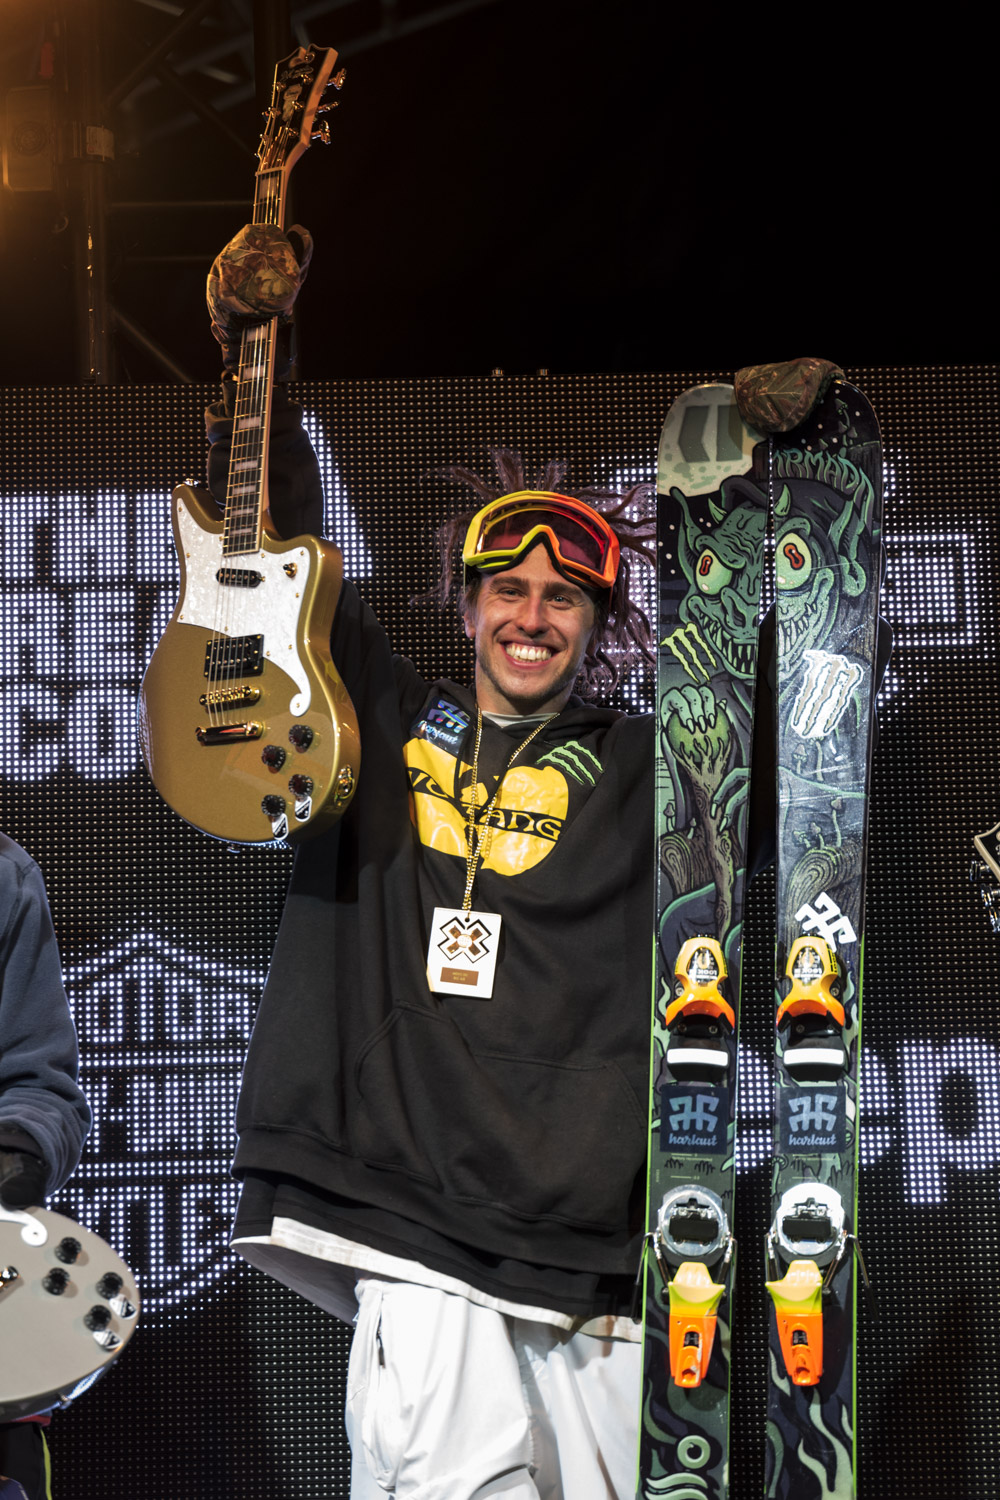 Monster Energy's Henrik Harlaut Will Compete at X Games Aspen 2020 in Men's Ski Slopestyle, Big Air and Knuckle Huck